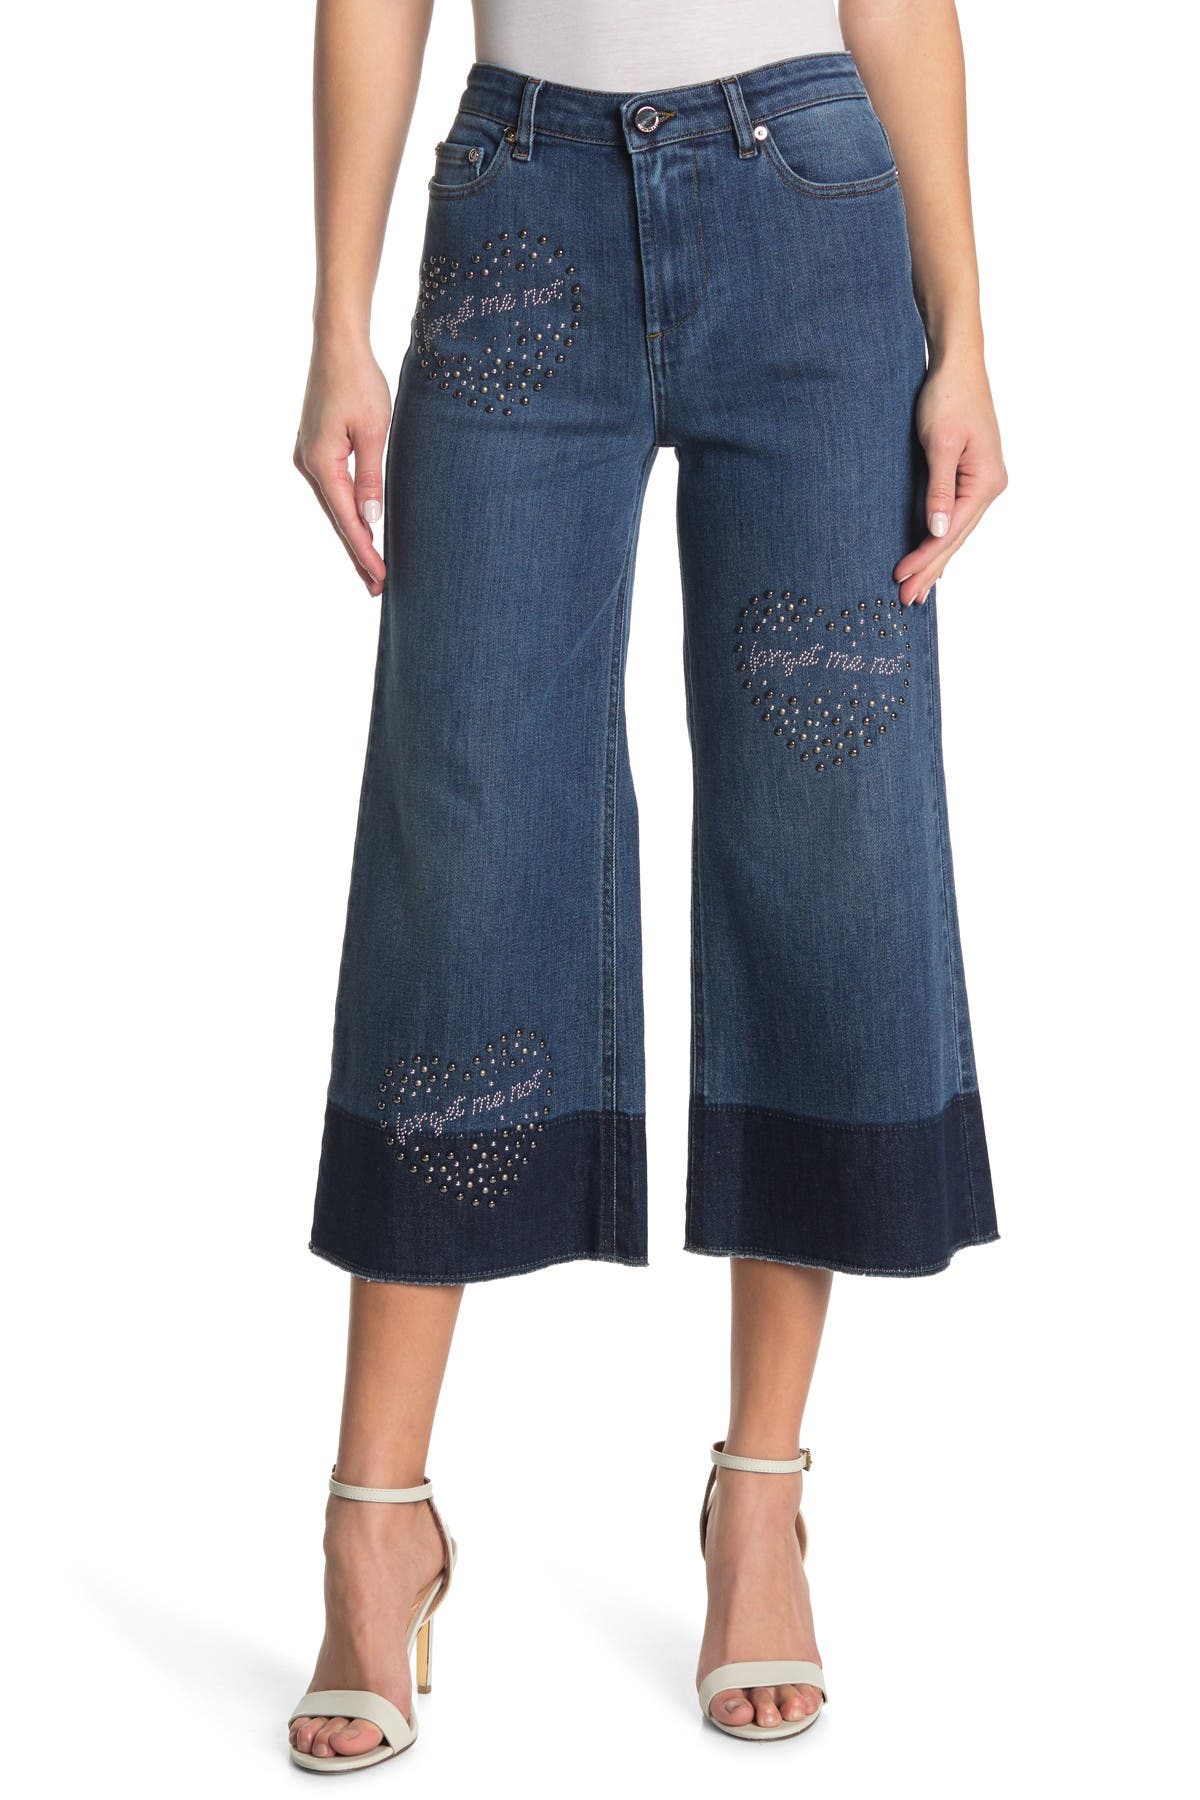 Red Valentino Cropped Studded Flare Leg Jeans In Denim Lavaggio Vintage 678